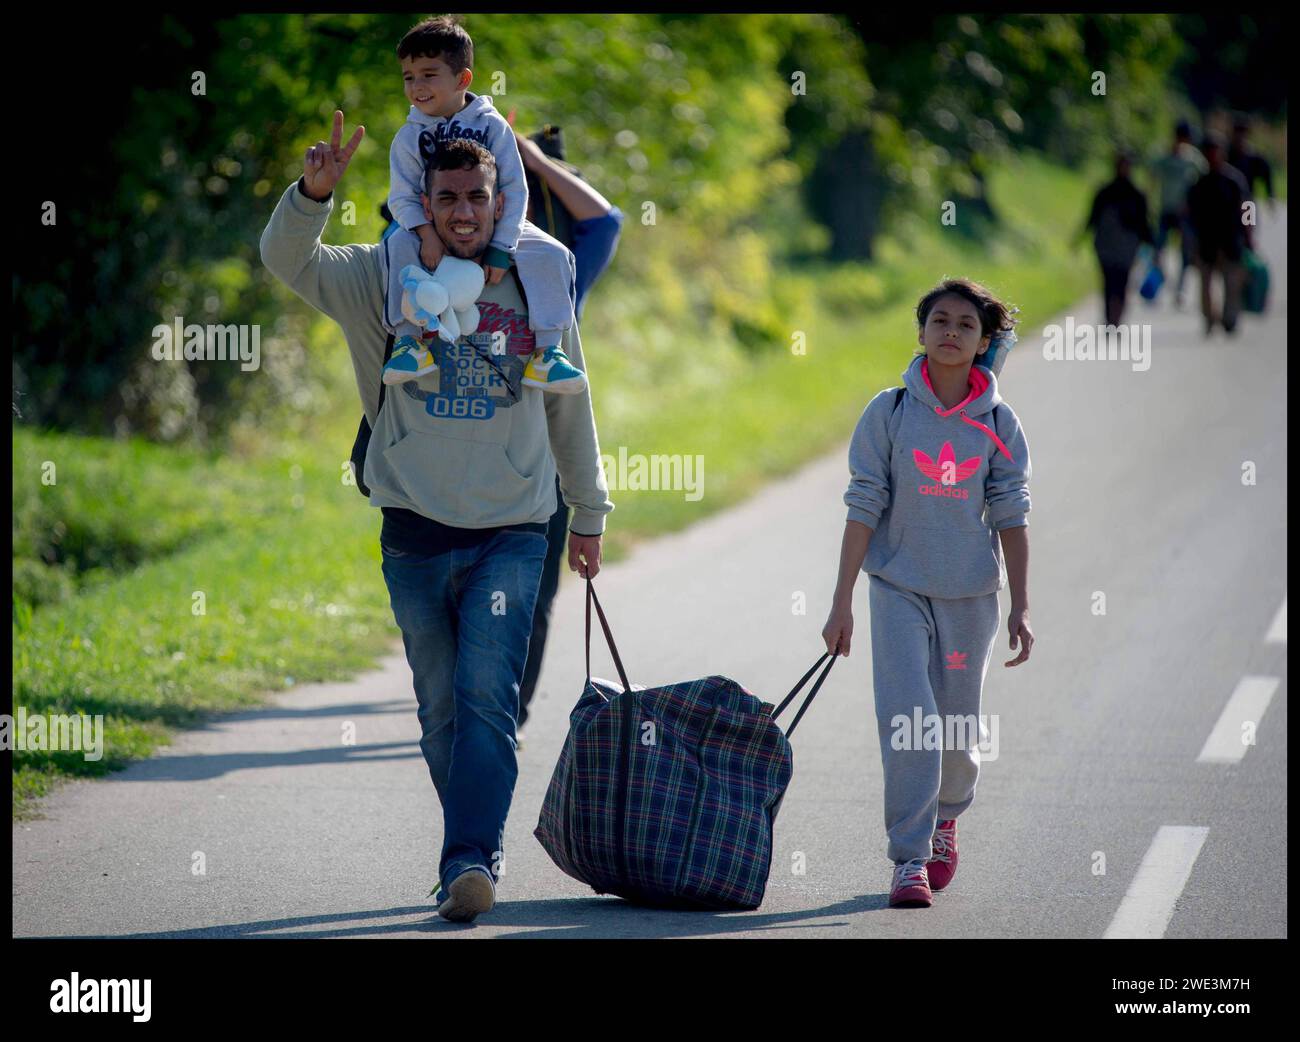 Image ©Licensed to Parsons Media. 22/09/2015.Croatia. Migrants in Croatia. Migrant children.   Croatia. Migrants walking in the village of Bapska, Croatia, after just crossing the Border from Serbia into Croatia as they make their way to Hungary.   Picture by Andrew Parsons / Parsons Media Stock Photo